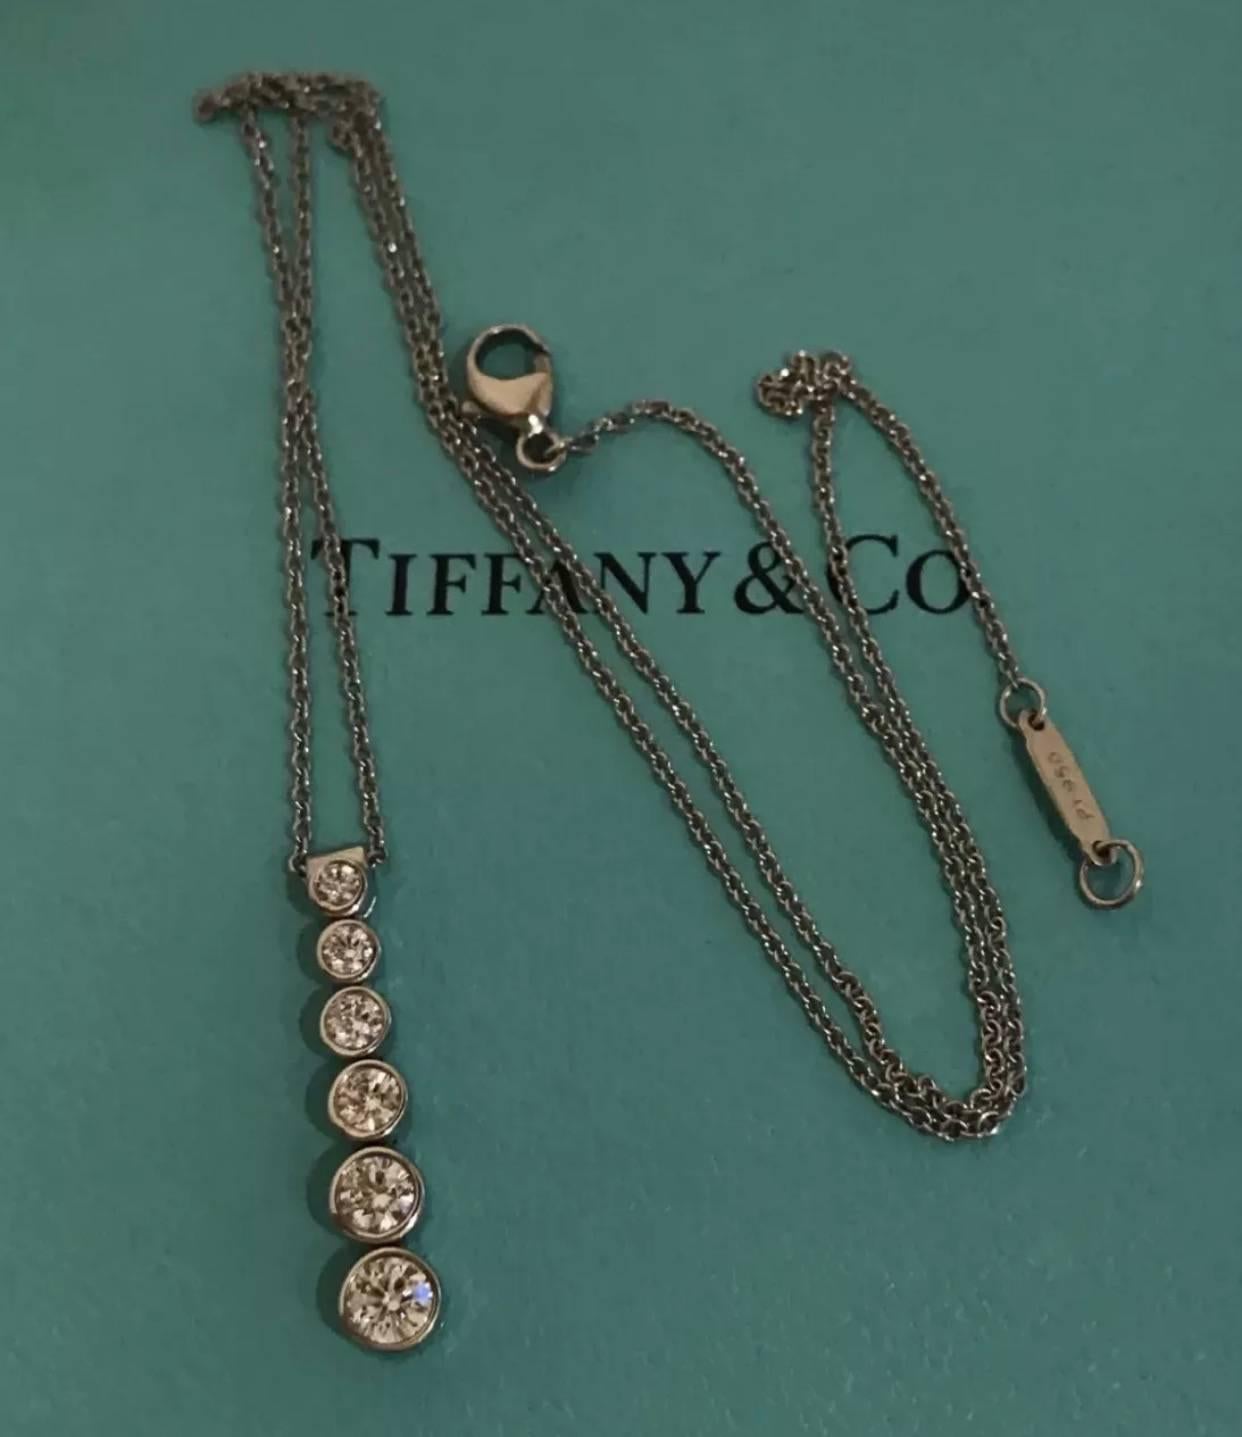 Tiffany & Co Platinum Diamond Jazz Drop Necklace set in platinum. The necklace features 6 round brilliant cut diamonds totalling approx 0.45 carat weight of F colour and VS1 clarity. The pendant measures 22.5mm long and 4.6mm wide and the chain